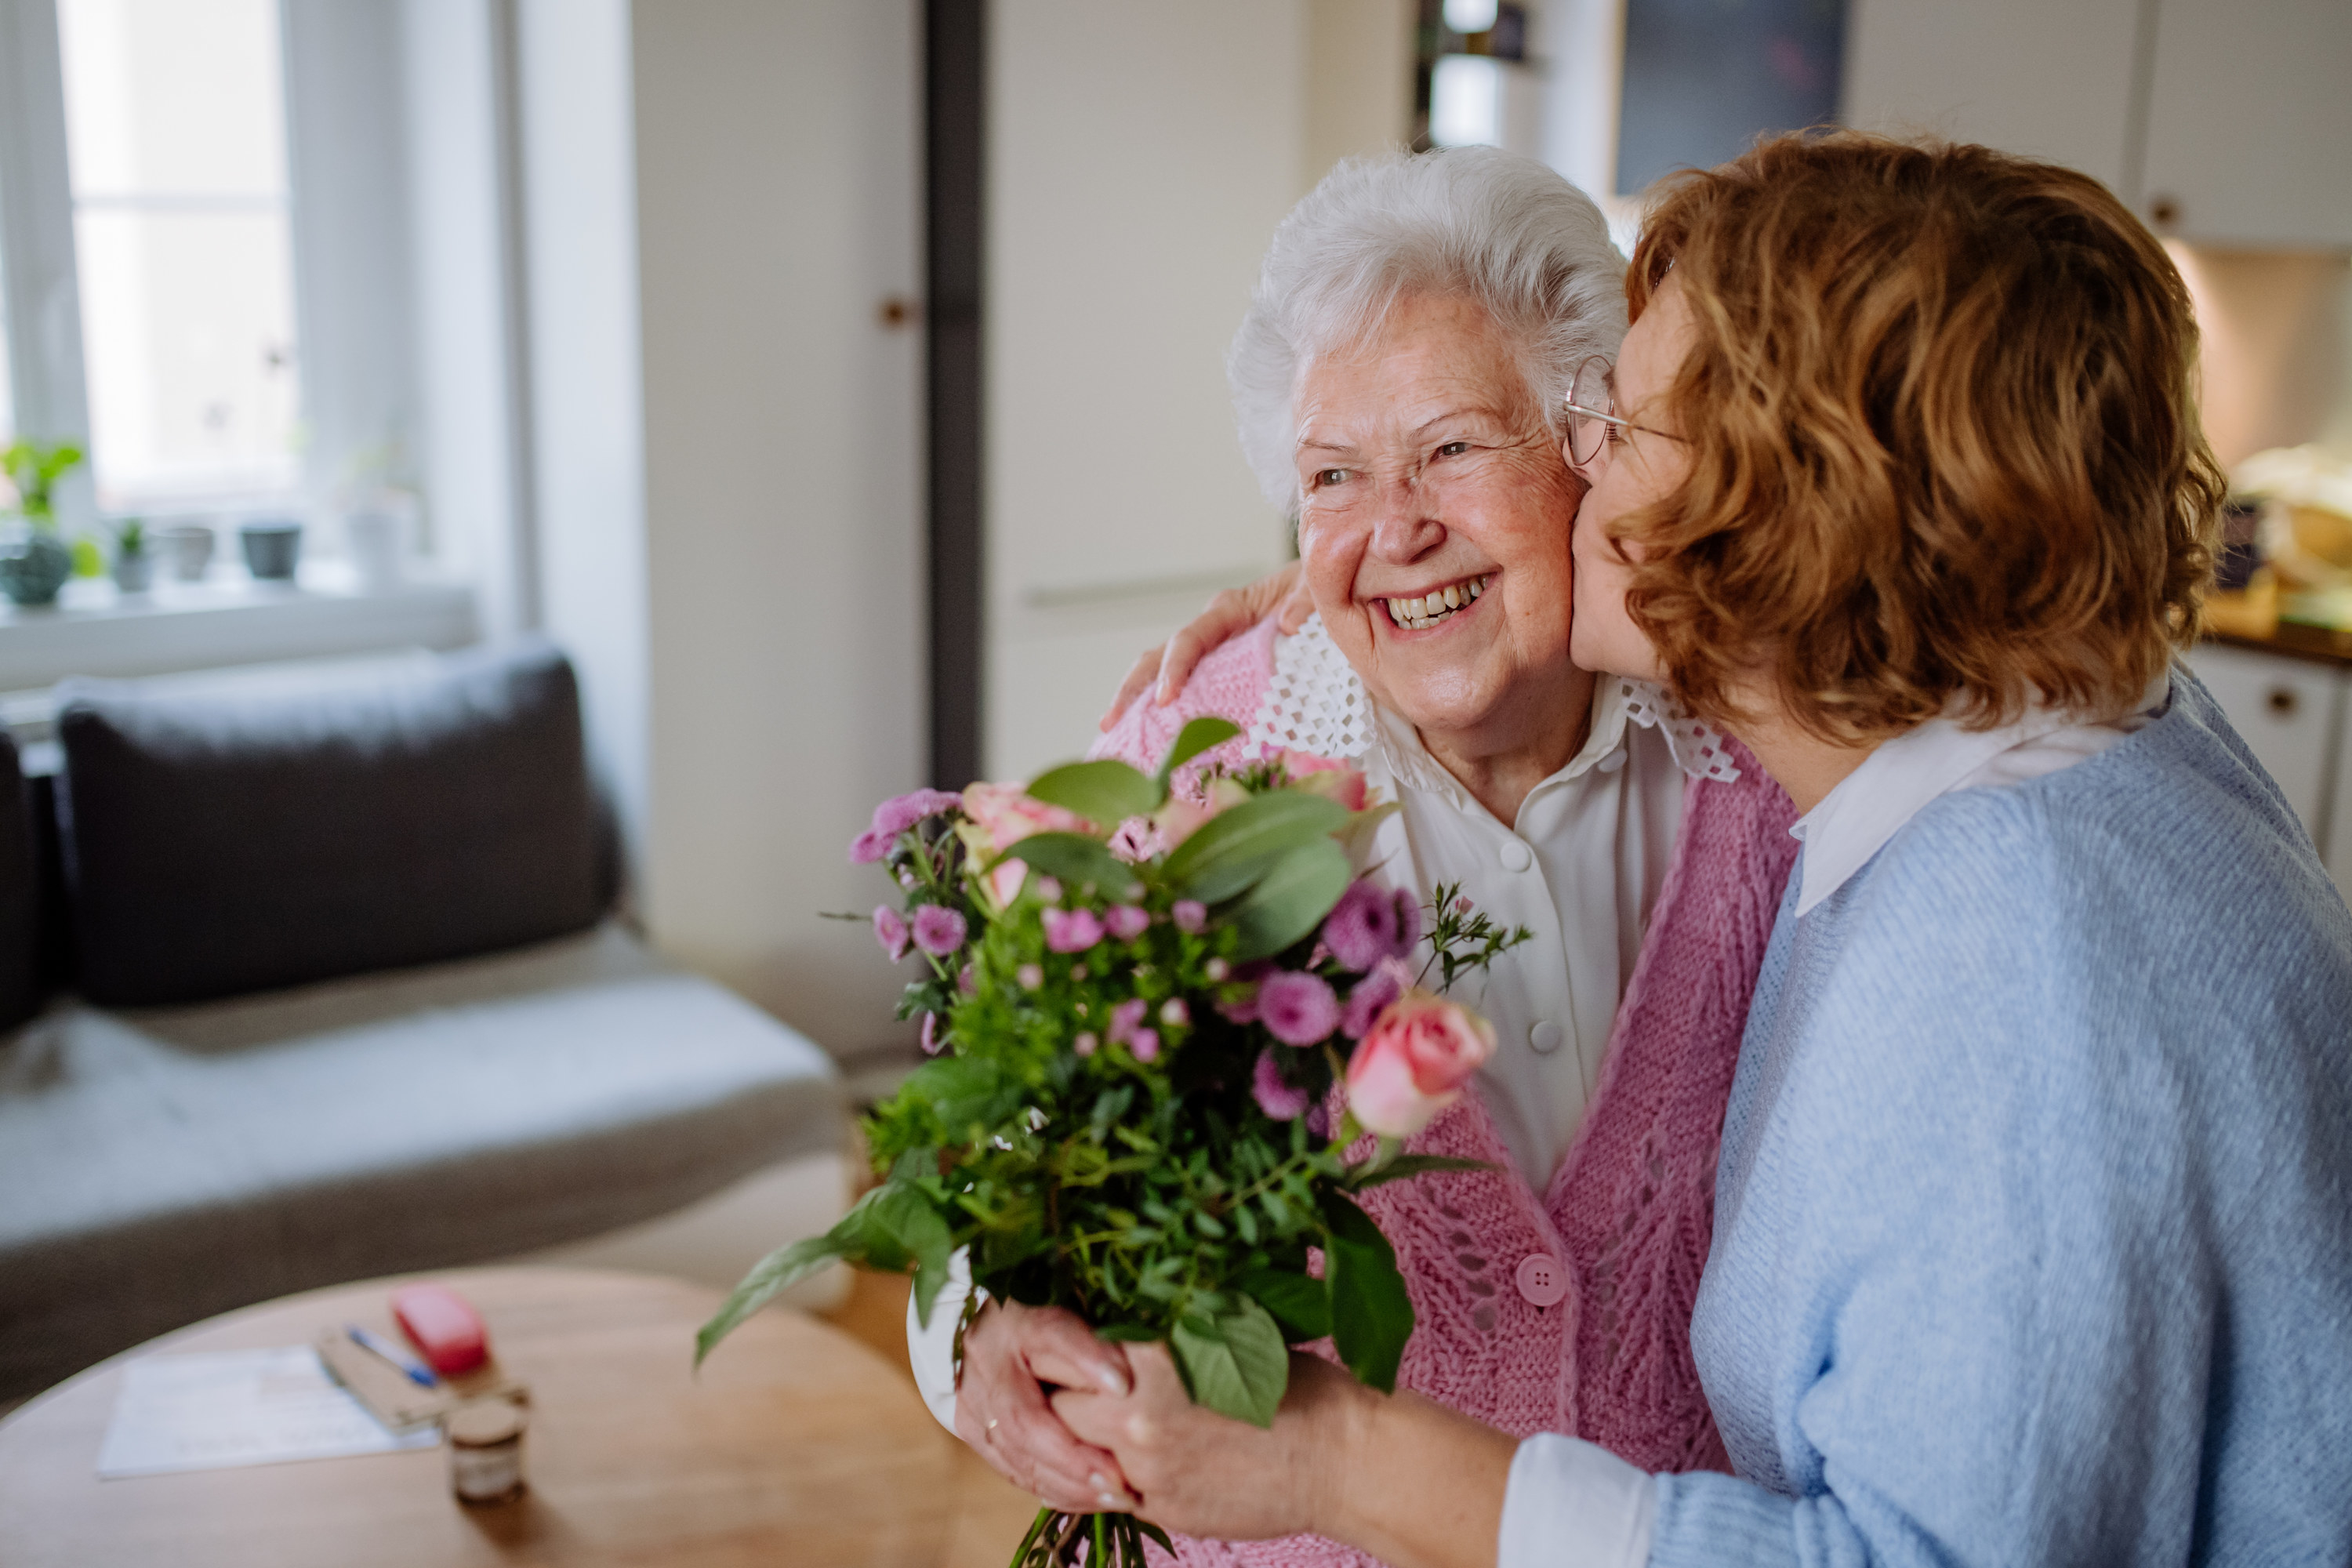 A person kissing a smiling older woman and giving her a bouquet of flowers